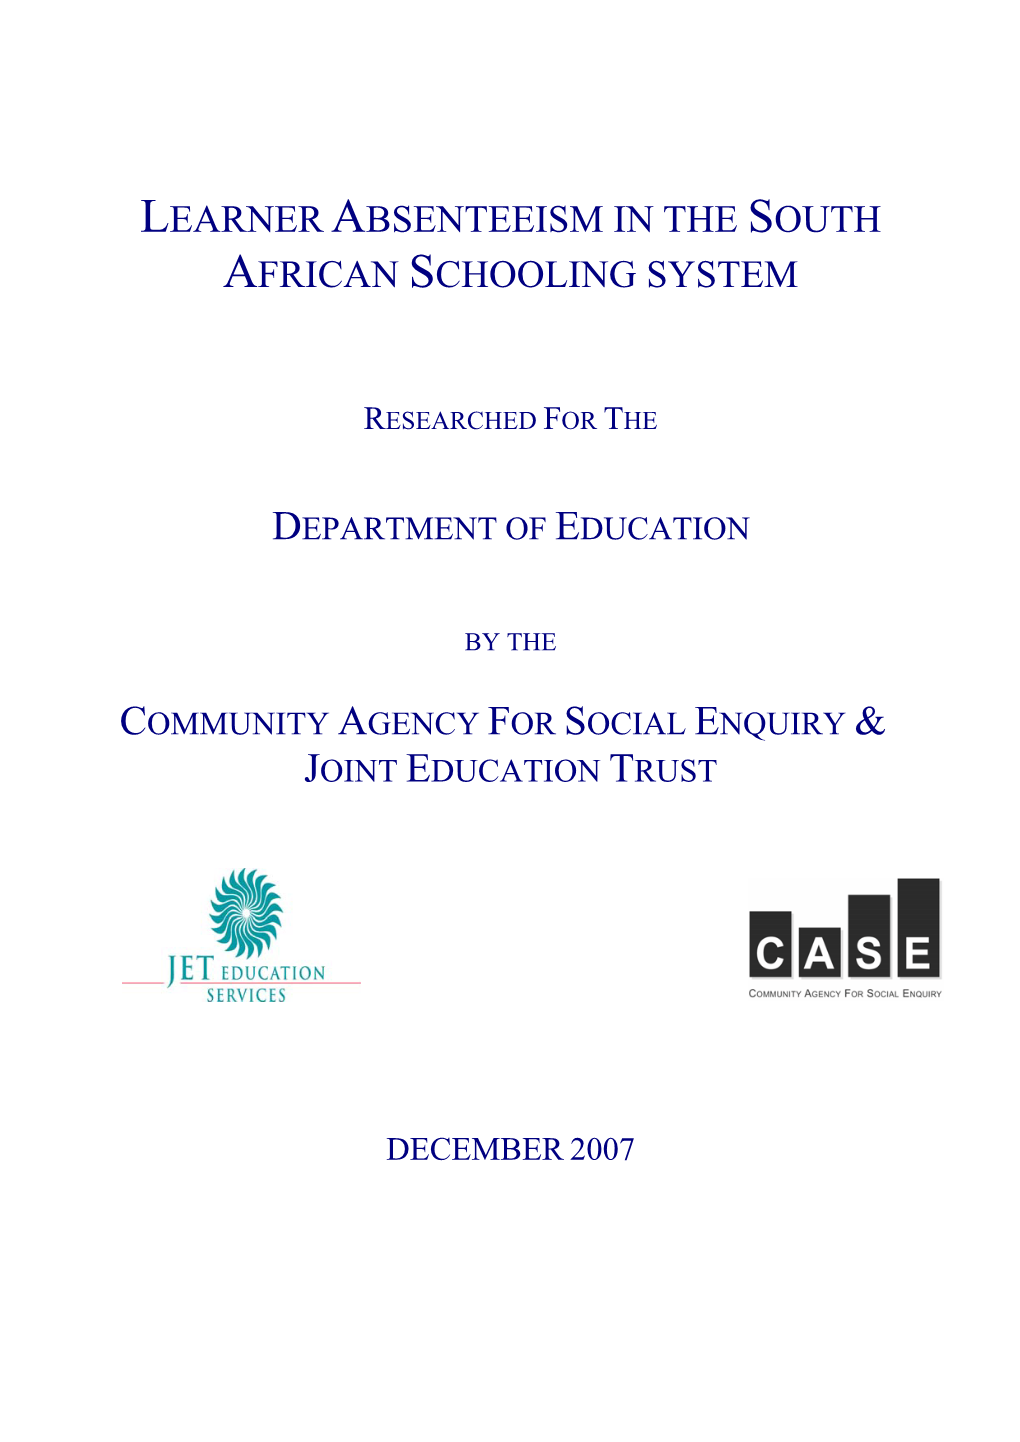 Learner Absenteeism in the South African Schooling System